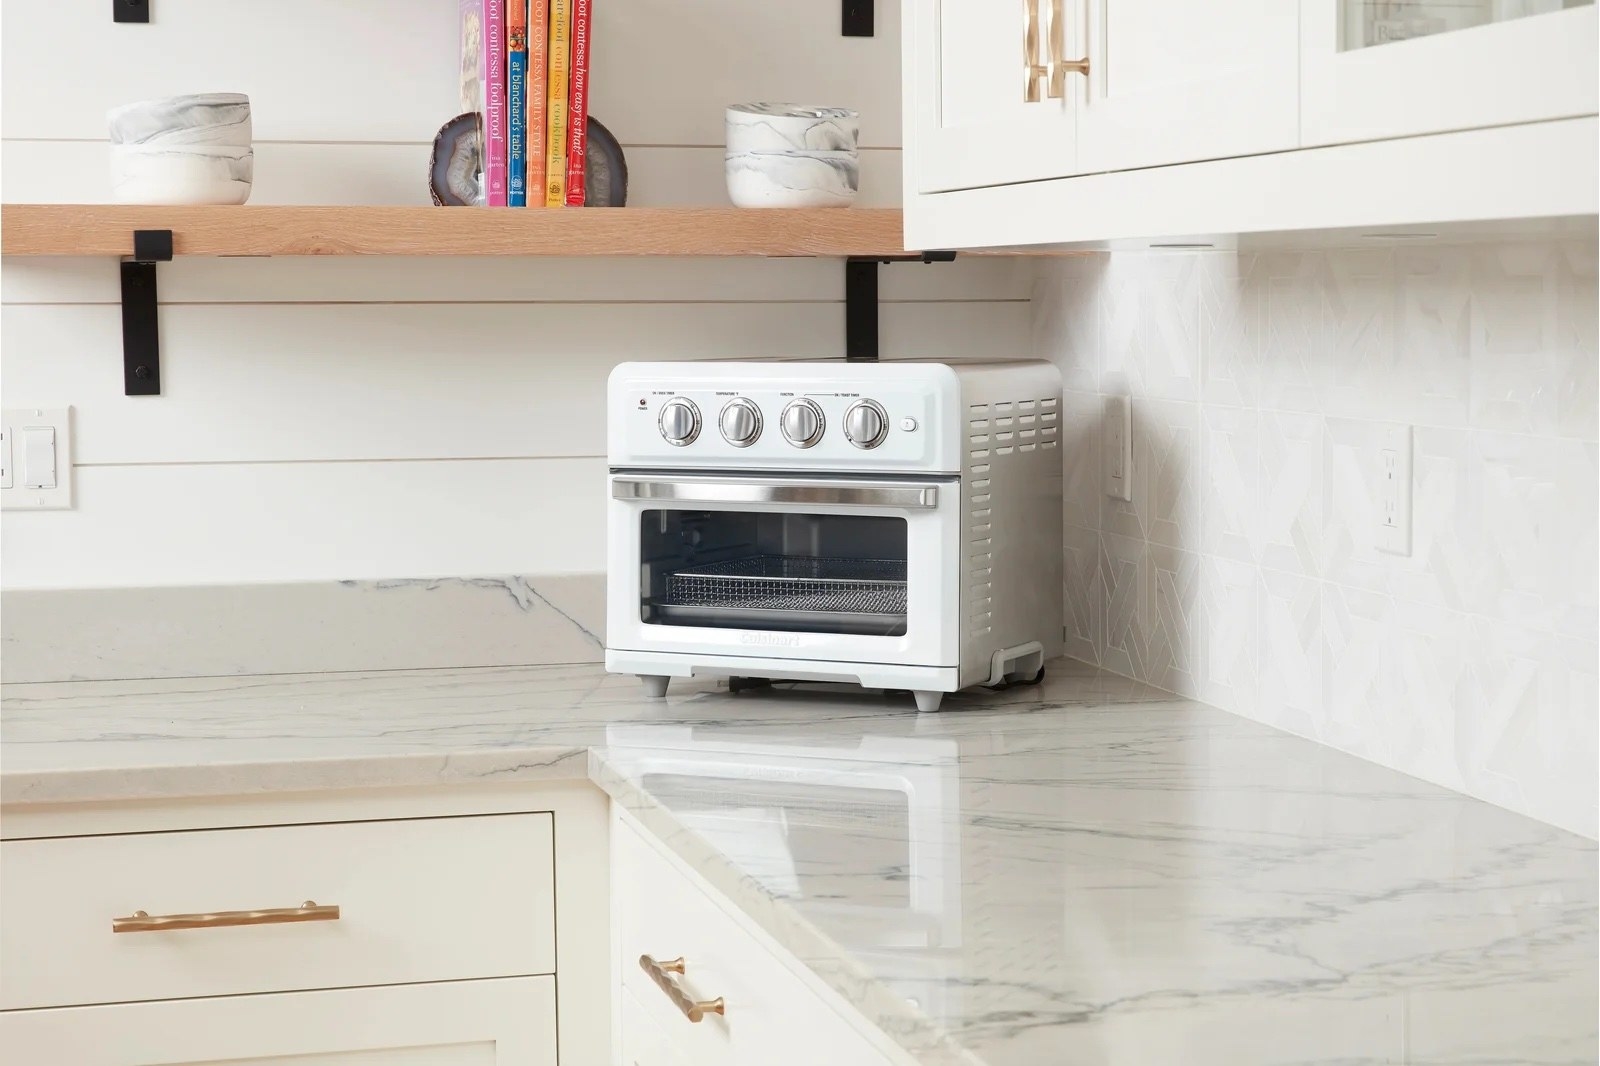 a photo of the white toaster oven air fryer on a kitchen counter